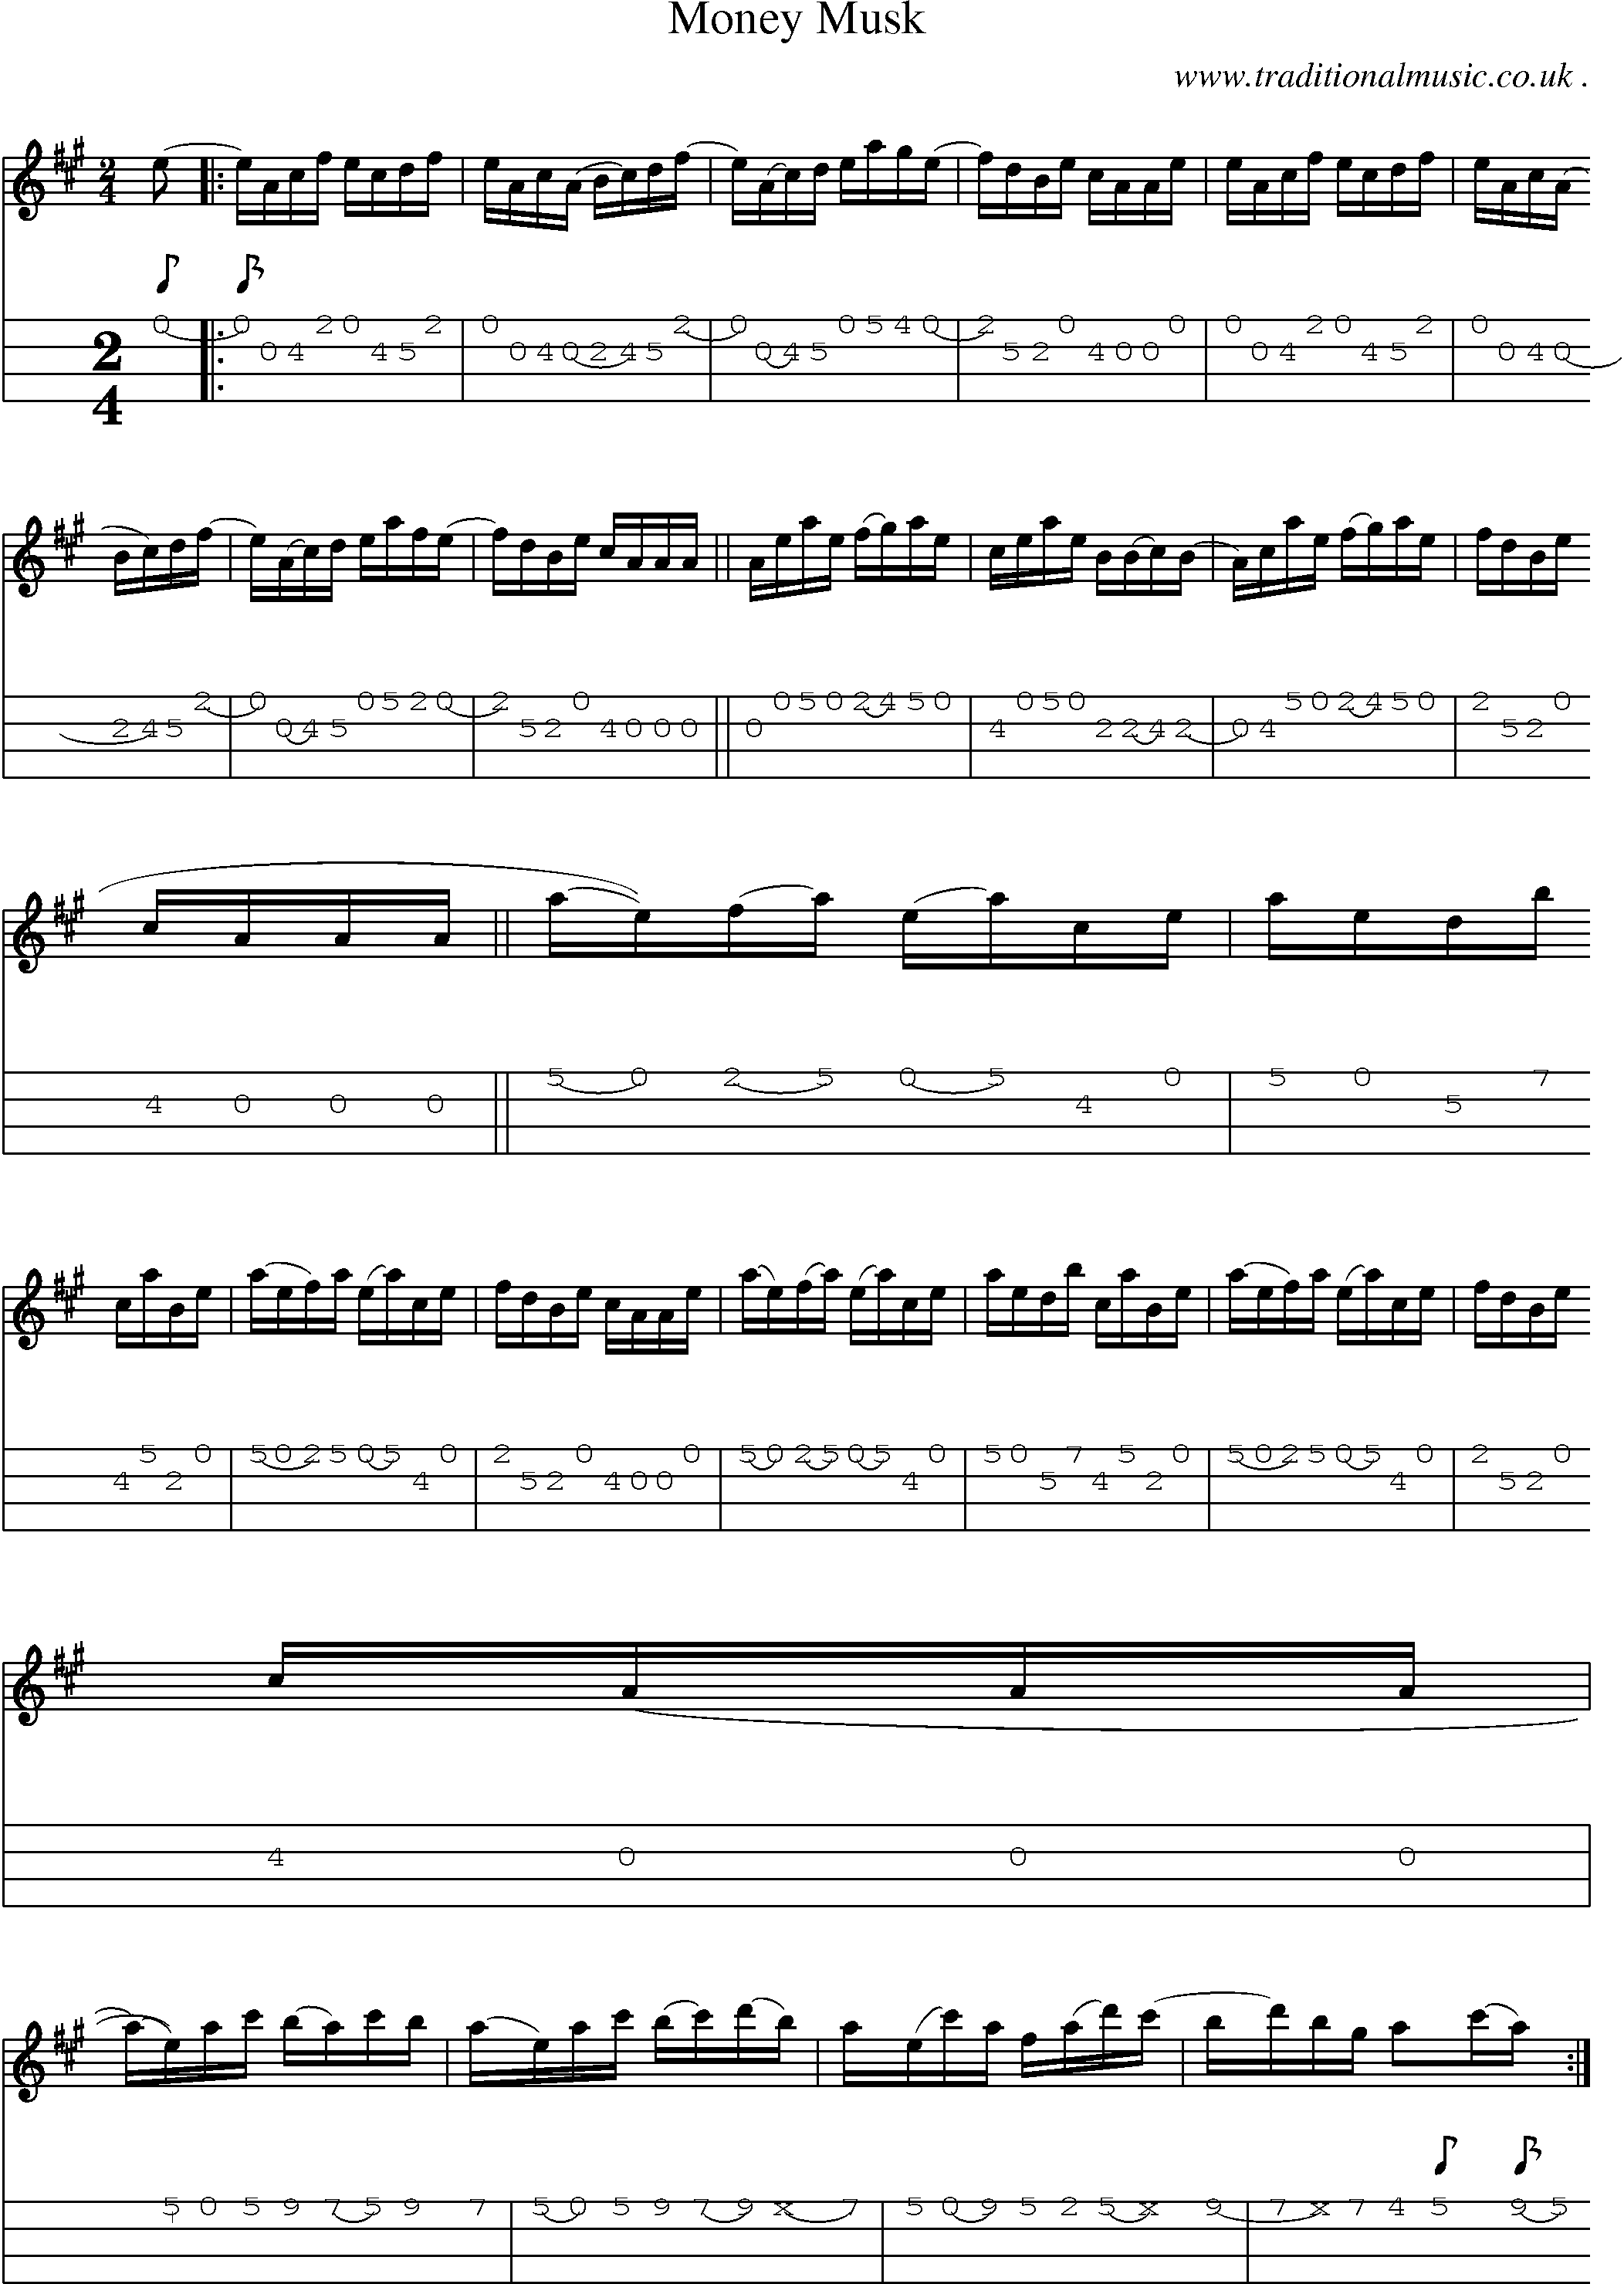 Sheet-music  score, Chords and Mandolin Tabs for Money Musk